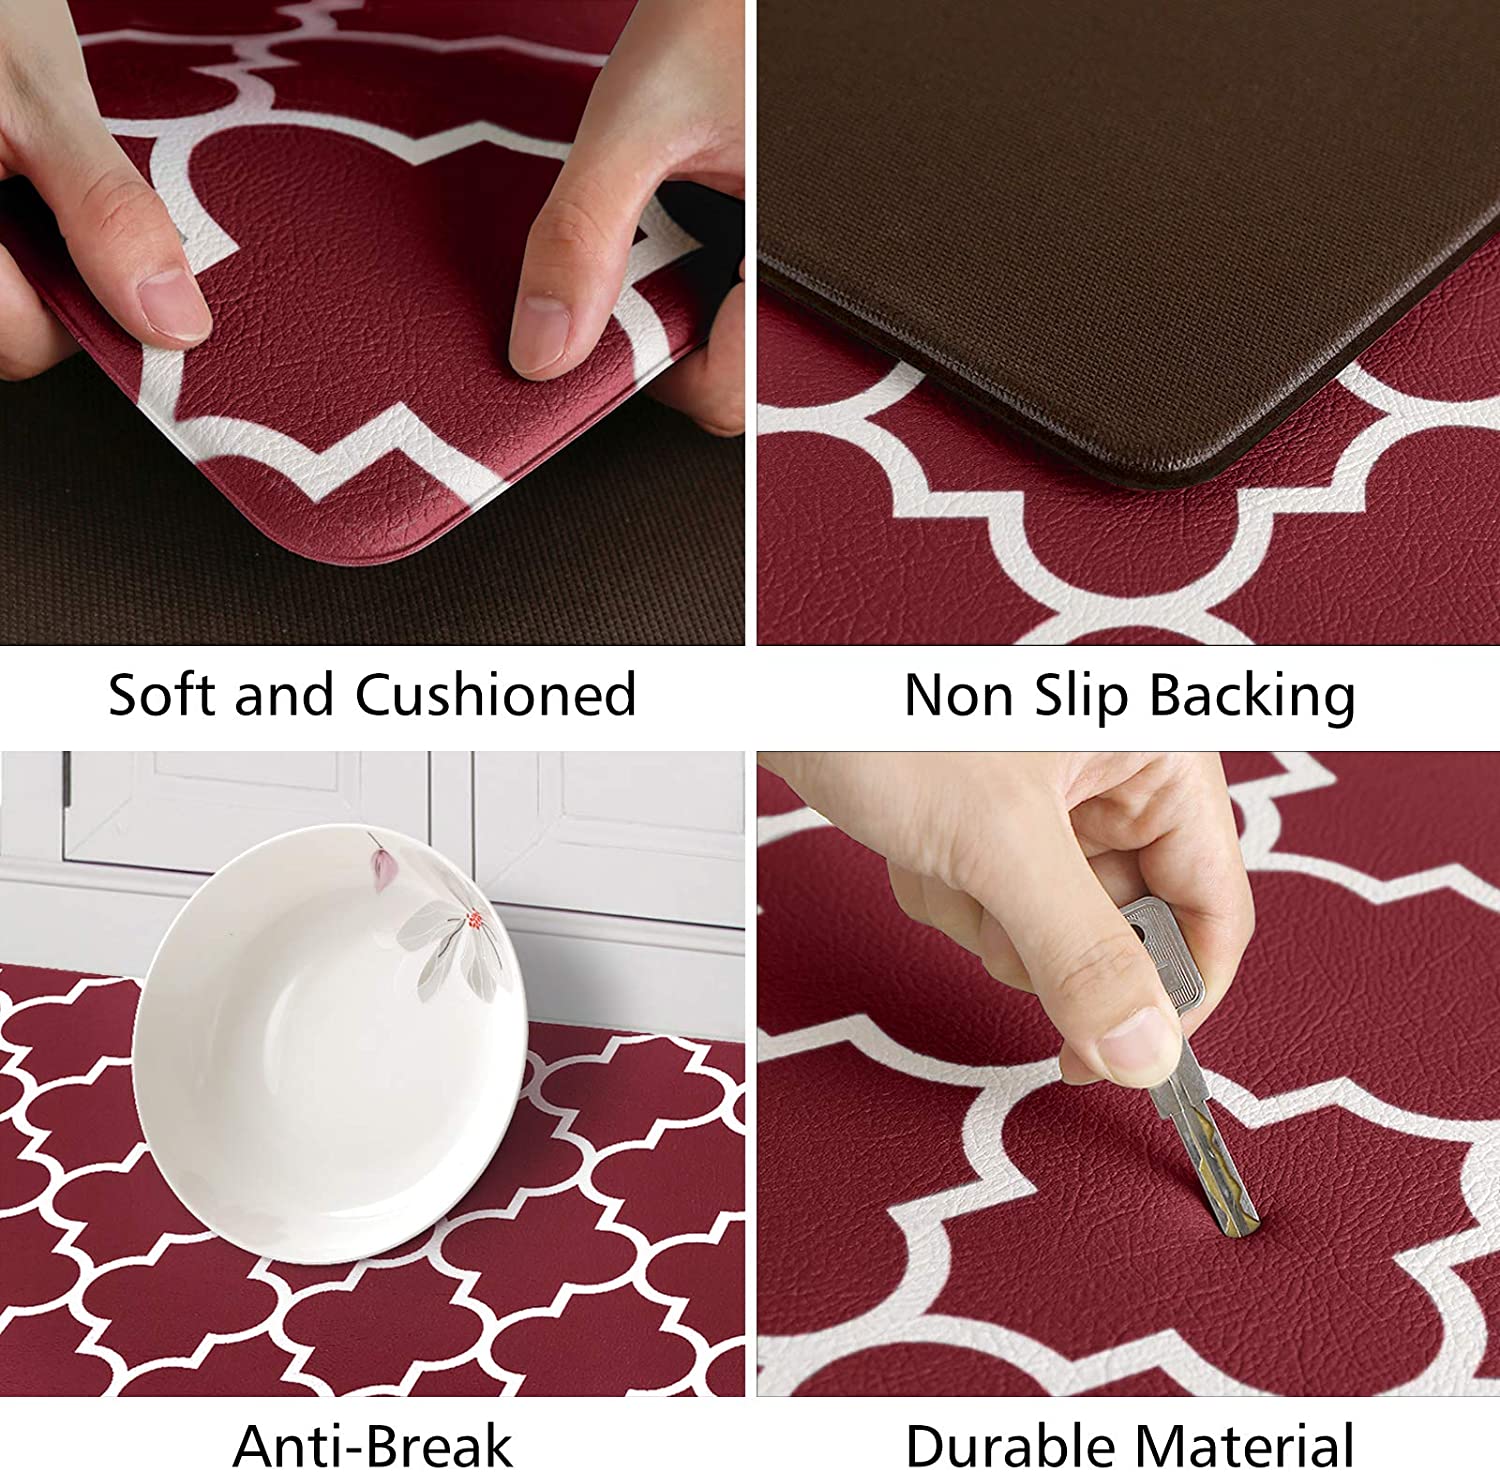 WISELIFE Comfort Non-Slip Kitchen Mat And Rug, Cushioned, Anti-Fatigue,  Waterproof, Heavy Duty, PVC Ergonomic, Floor Home, Office, Sink, Laundry